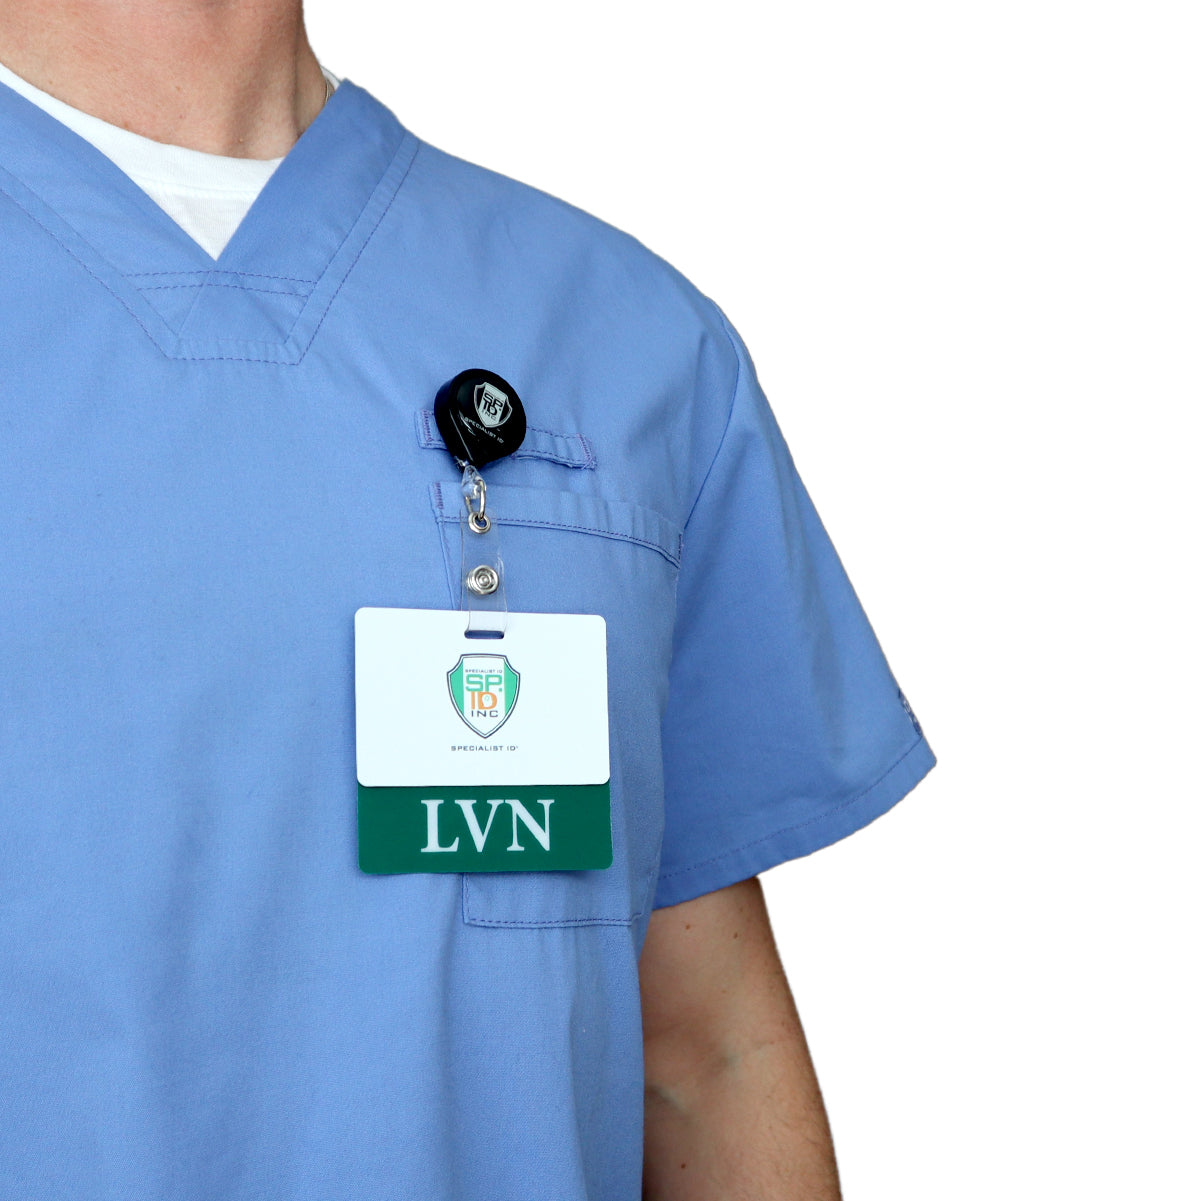 A person wearing blue scrubs with a white undershirt has a badge labeled "Clear LVN Badge Buddy - Horizontal ID Badge Backer for Licensed Vocational Nurses - Double Sided Print" attached to a retractable nurse badge holder near their chest pocket.